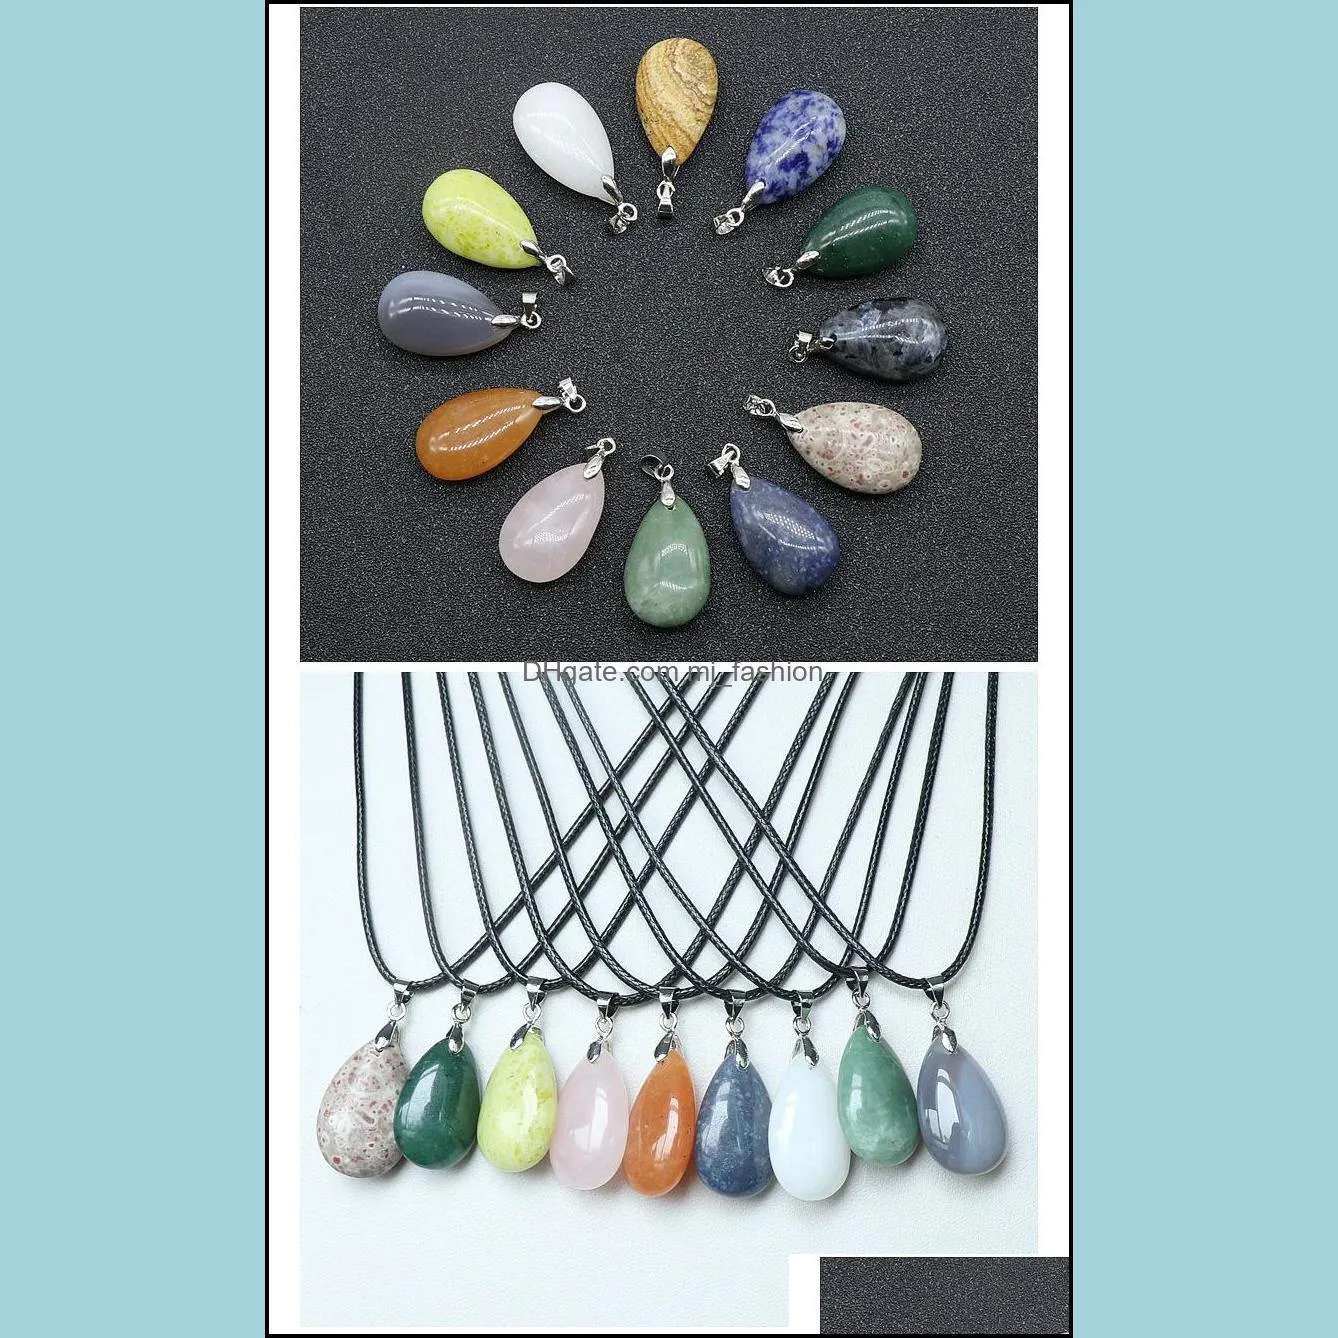 12 colors reiki healing jewelry water drop natural stone necklace quartz lapis opal pink crystal pyramid pendant amethyst necklaces